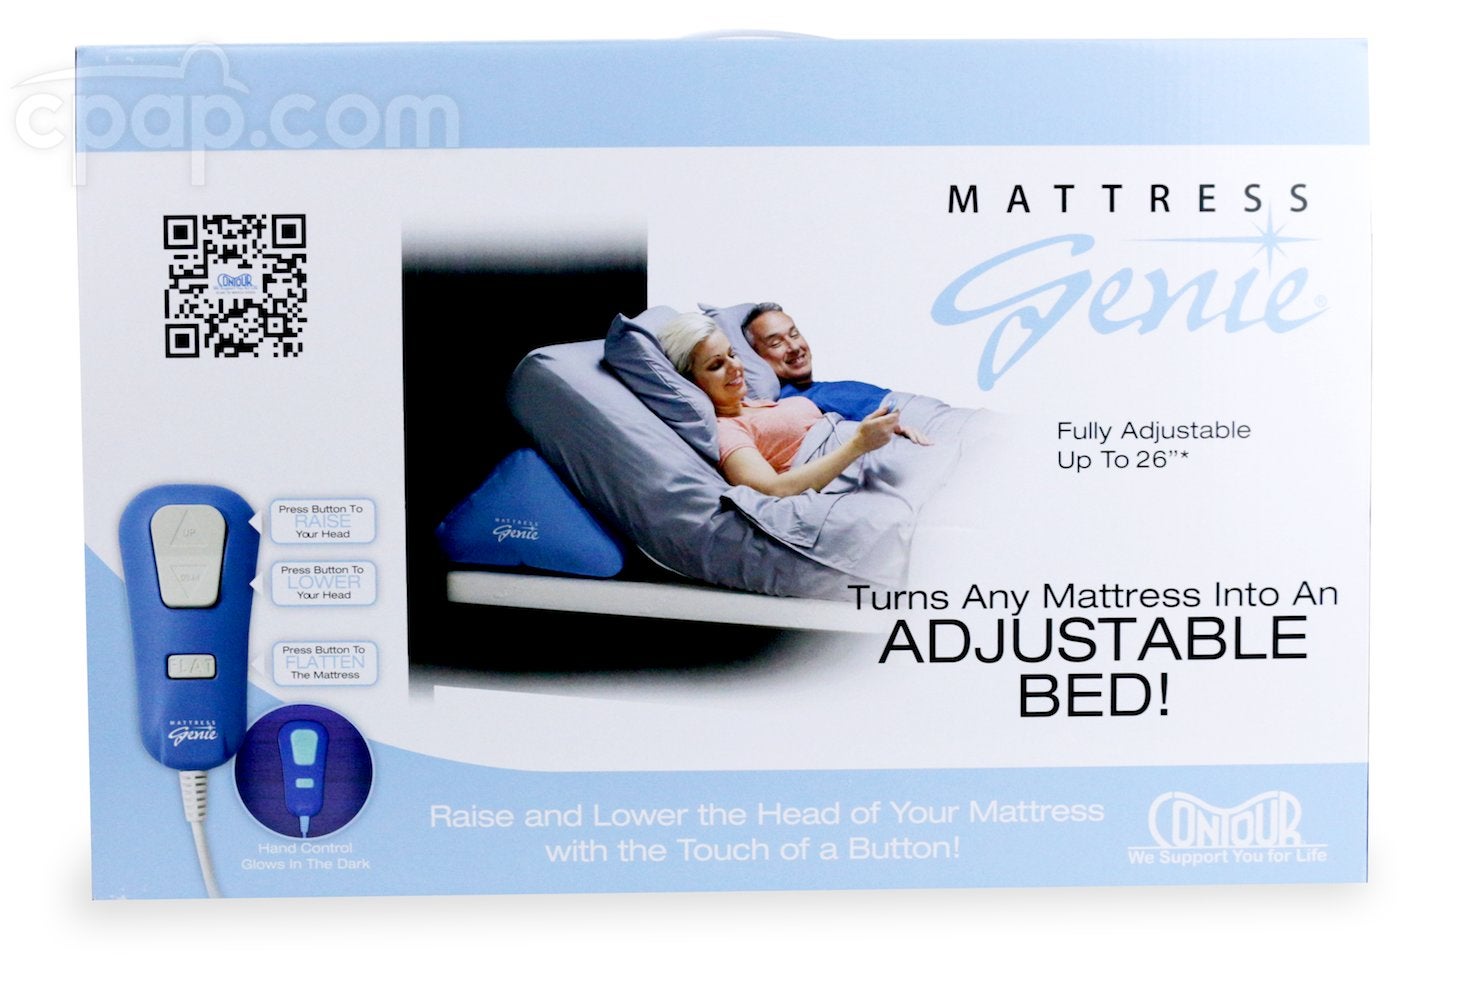 https://images.cpap.com/products/contour-products/58-400R/mattress-genie-main.jpg